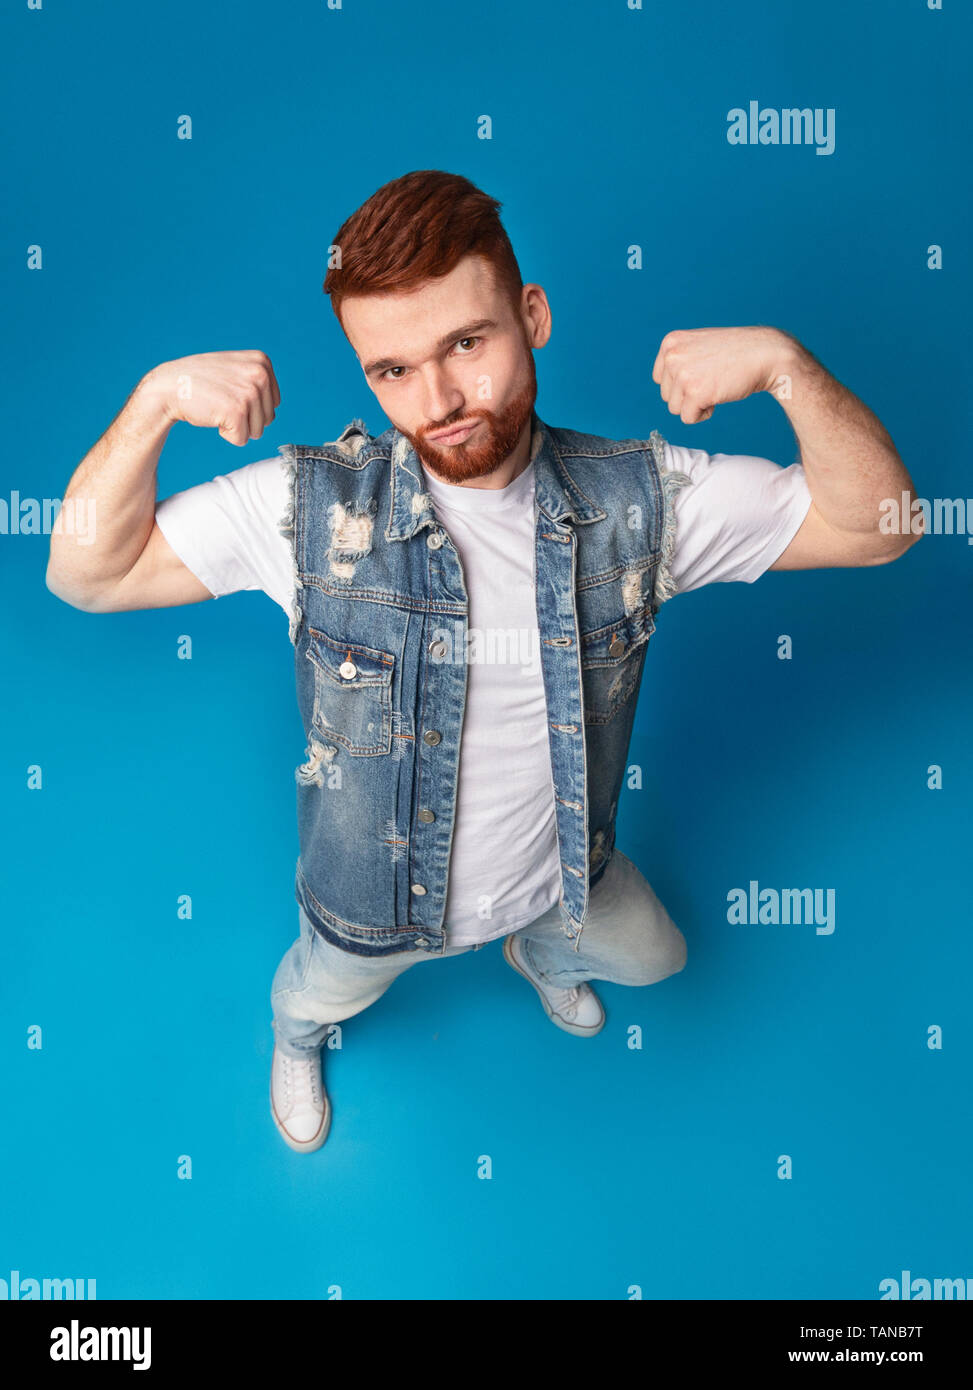 Awesome strong caucasian guy showing biceps on blue background Stock Photo